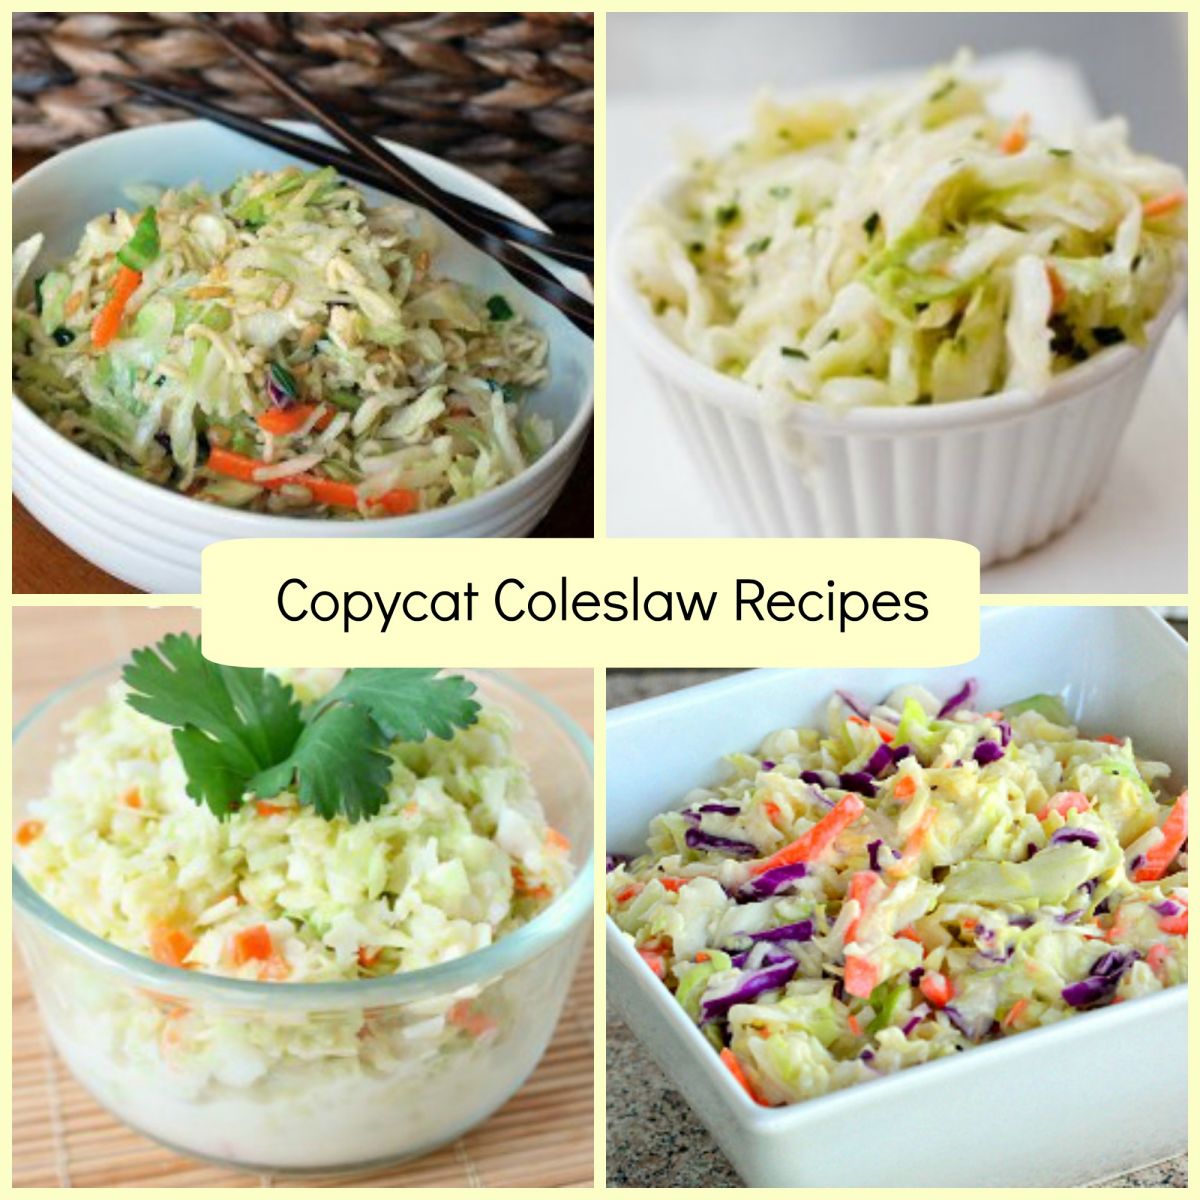 Recipes for Coleslaw